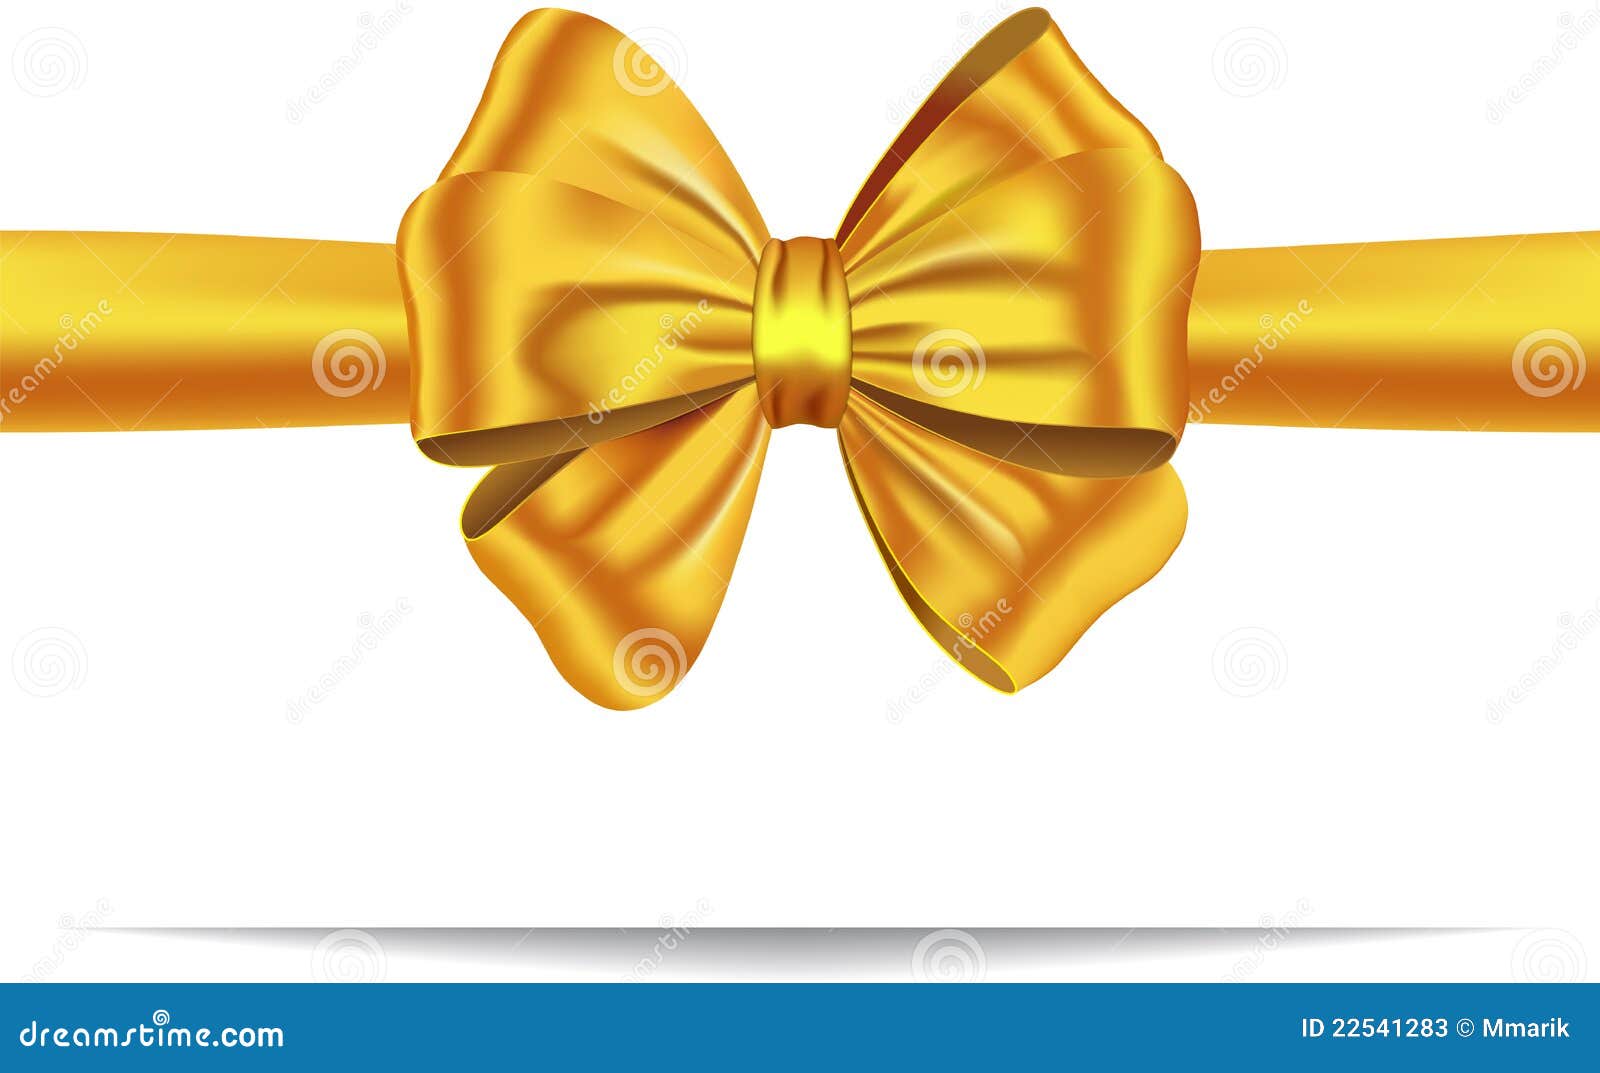 golden gift ribbon with bow